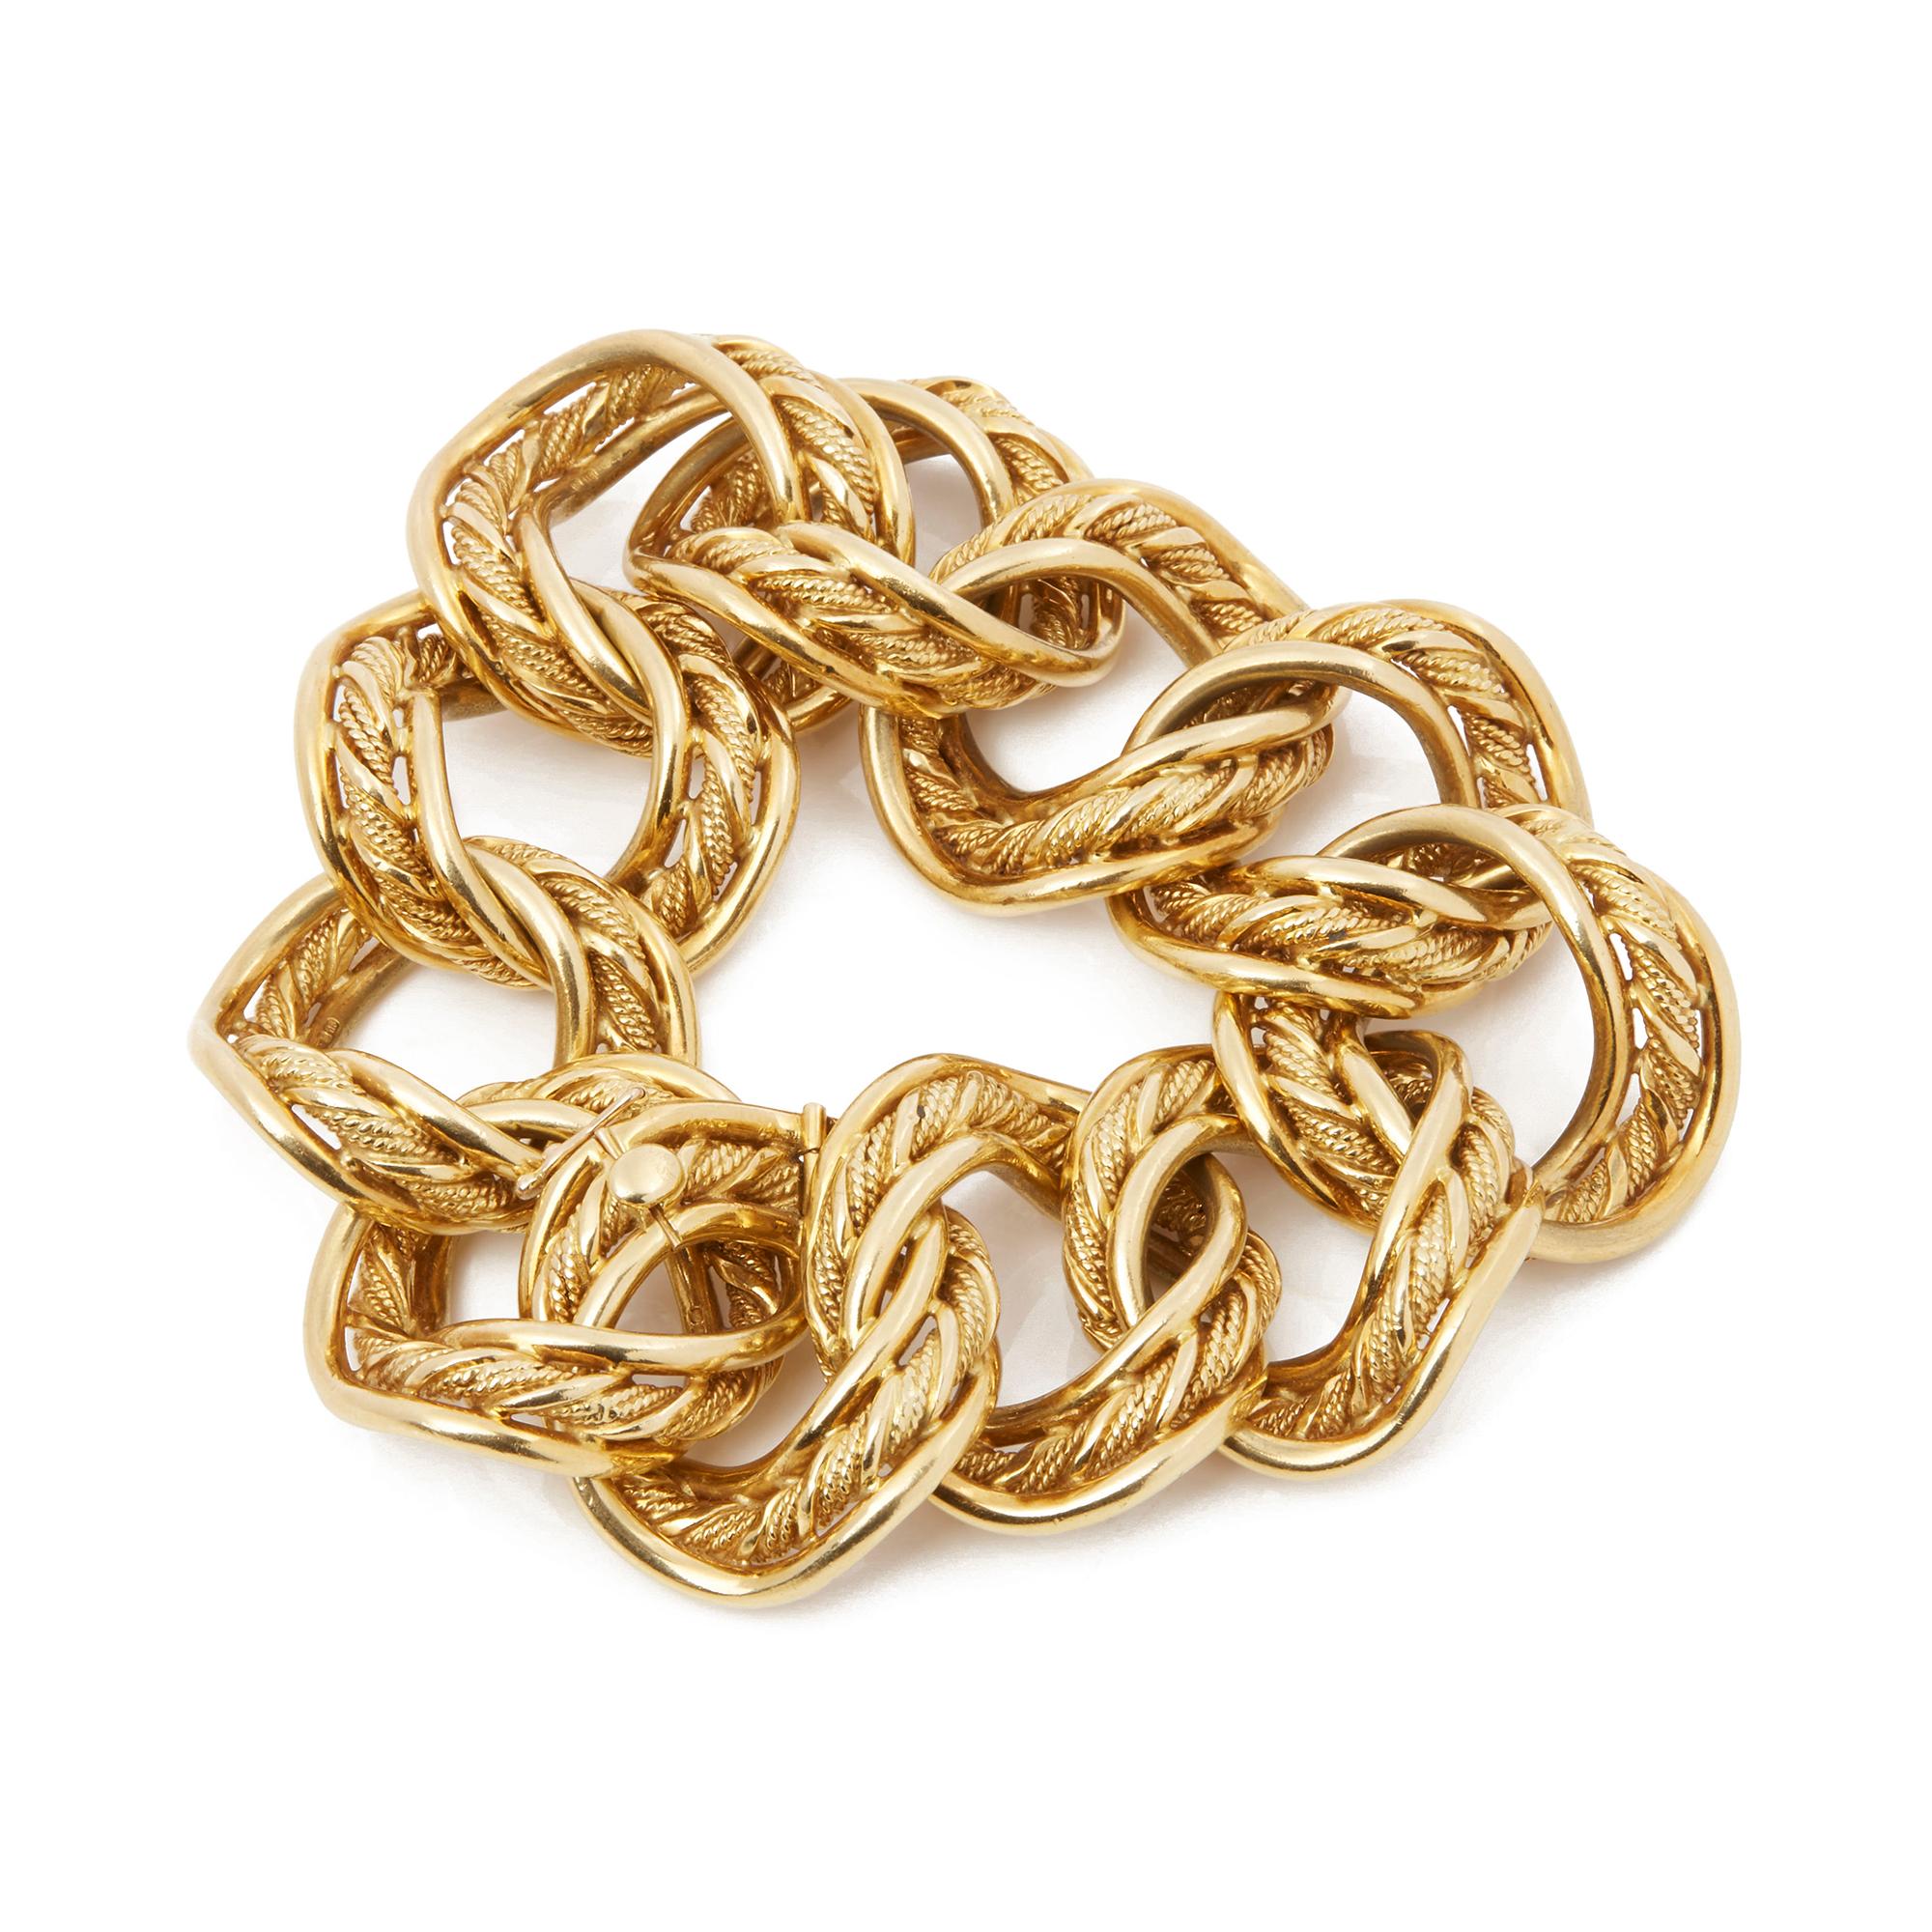 This vintage bracelet by Kutchinsky features a heavy chain design, made in 18k yellow gold. This bracelet has a secure hinge clasp. Complete with a Kutchinsky box. Our Xupes reference is COM2140 should you need to quote this